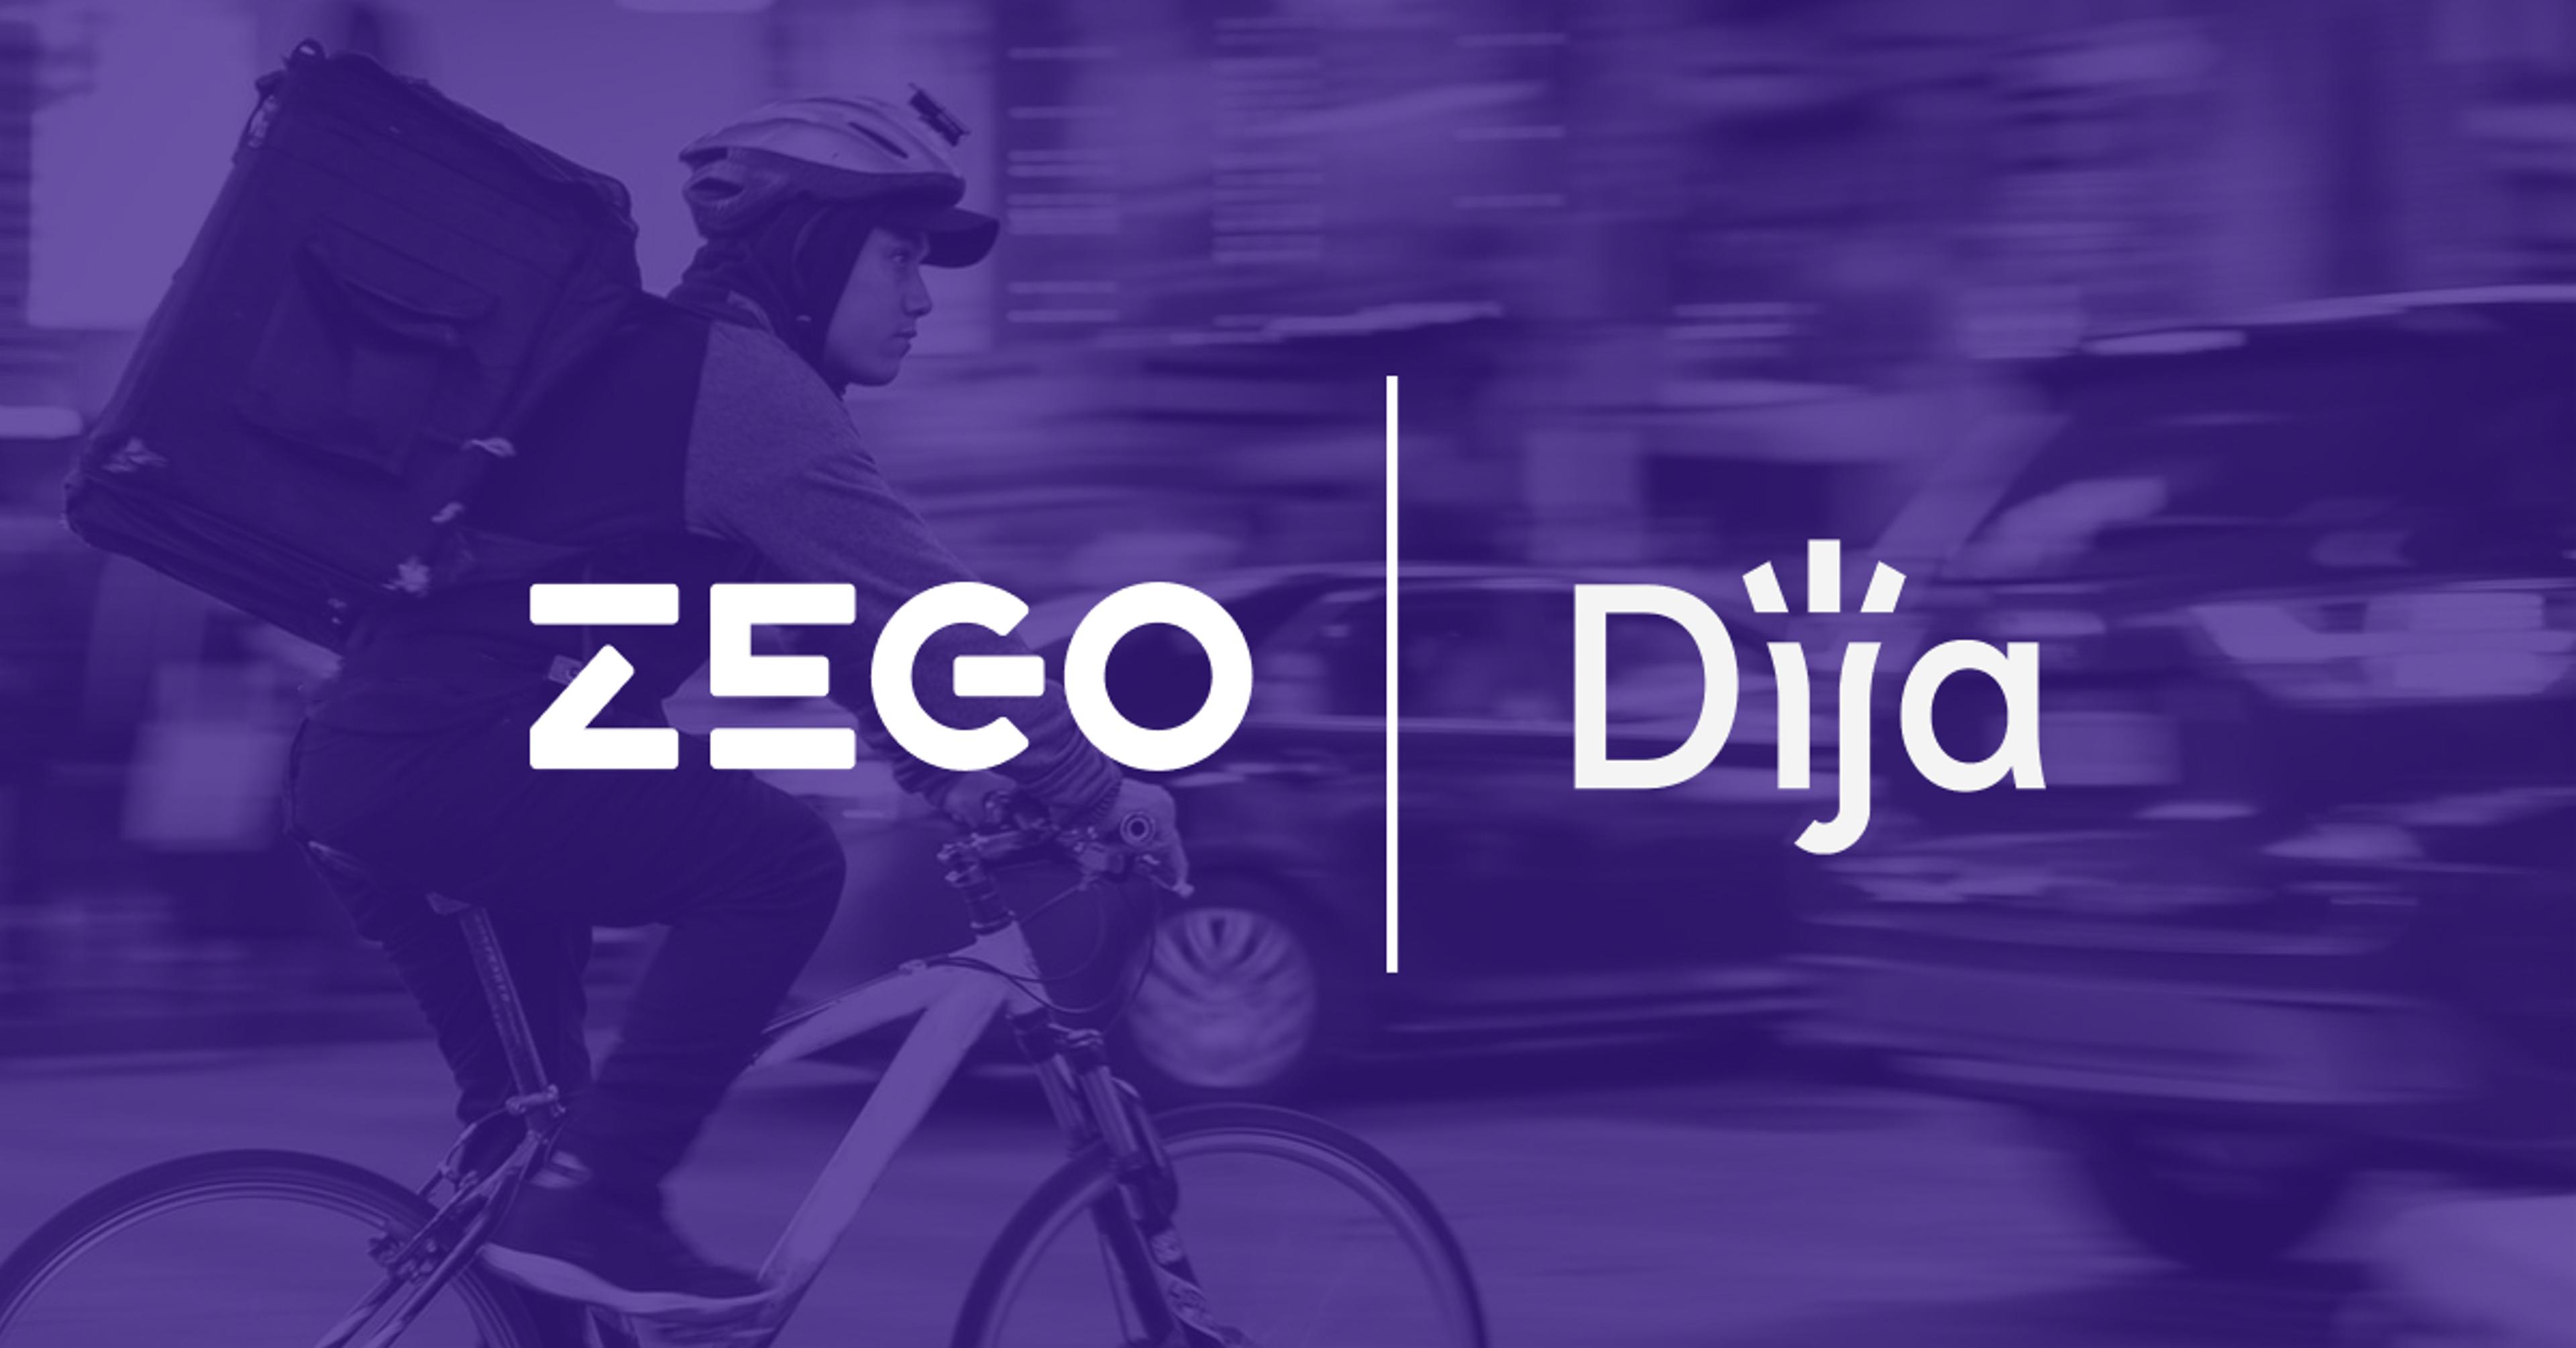 Zego partners with grocery delivery startup Dija to insure its commercial e-bike fleet